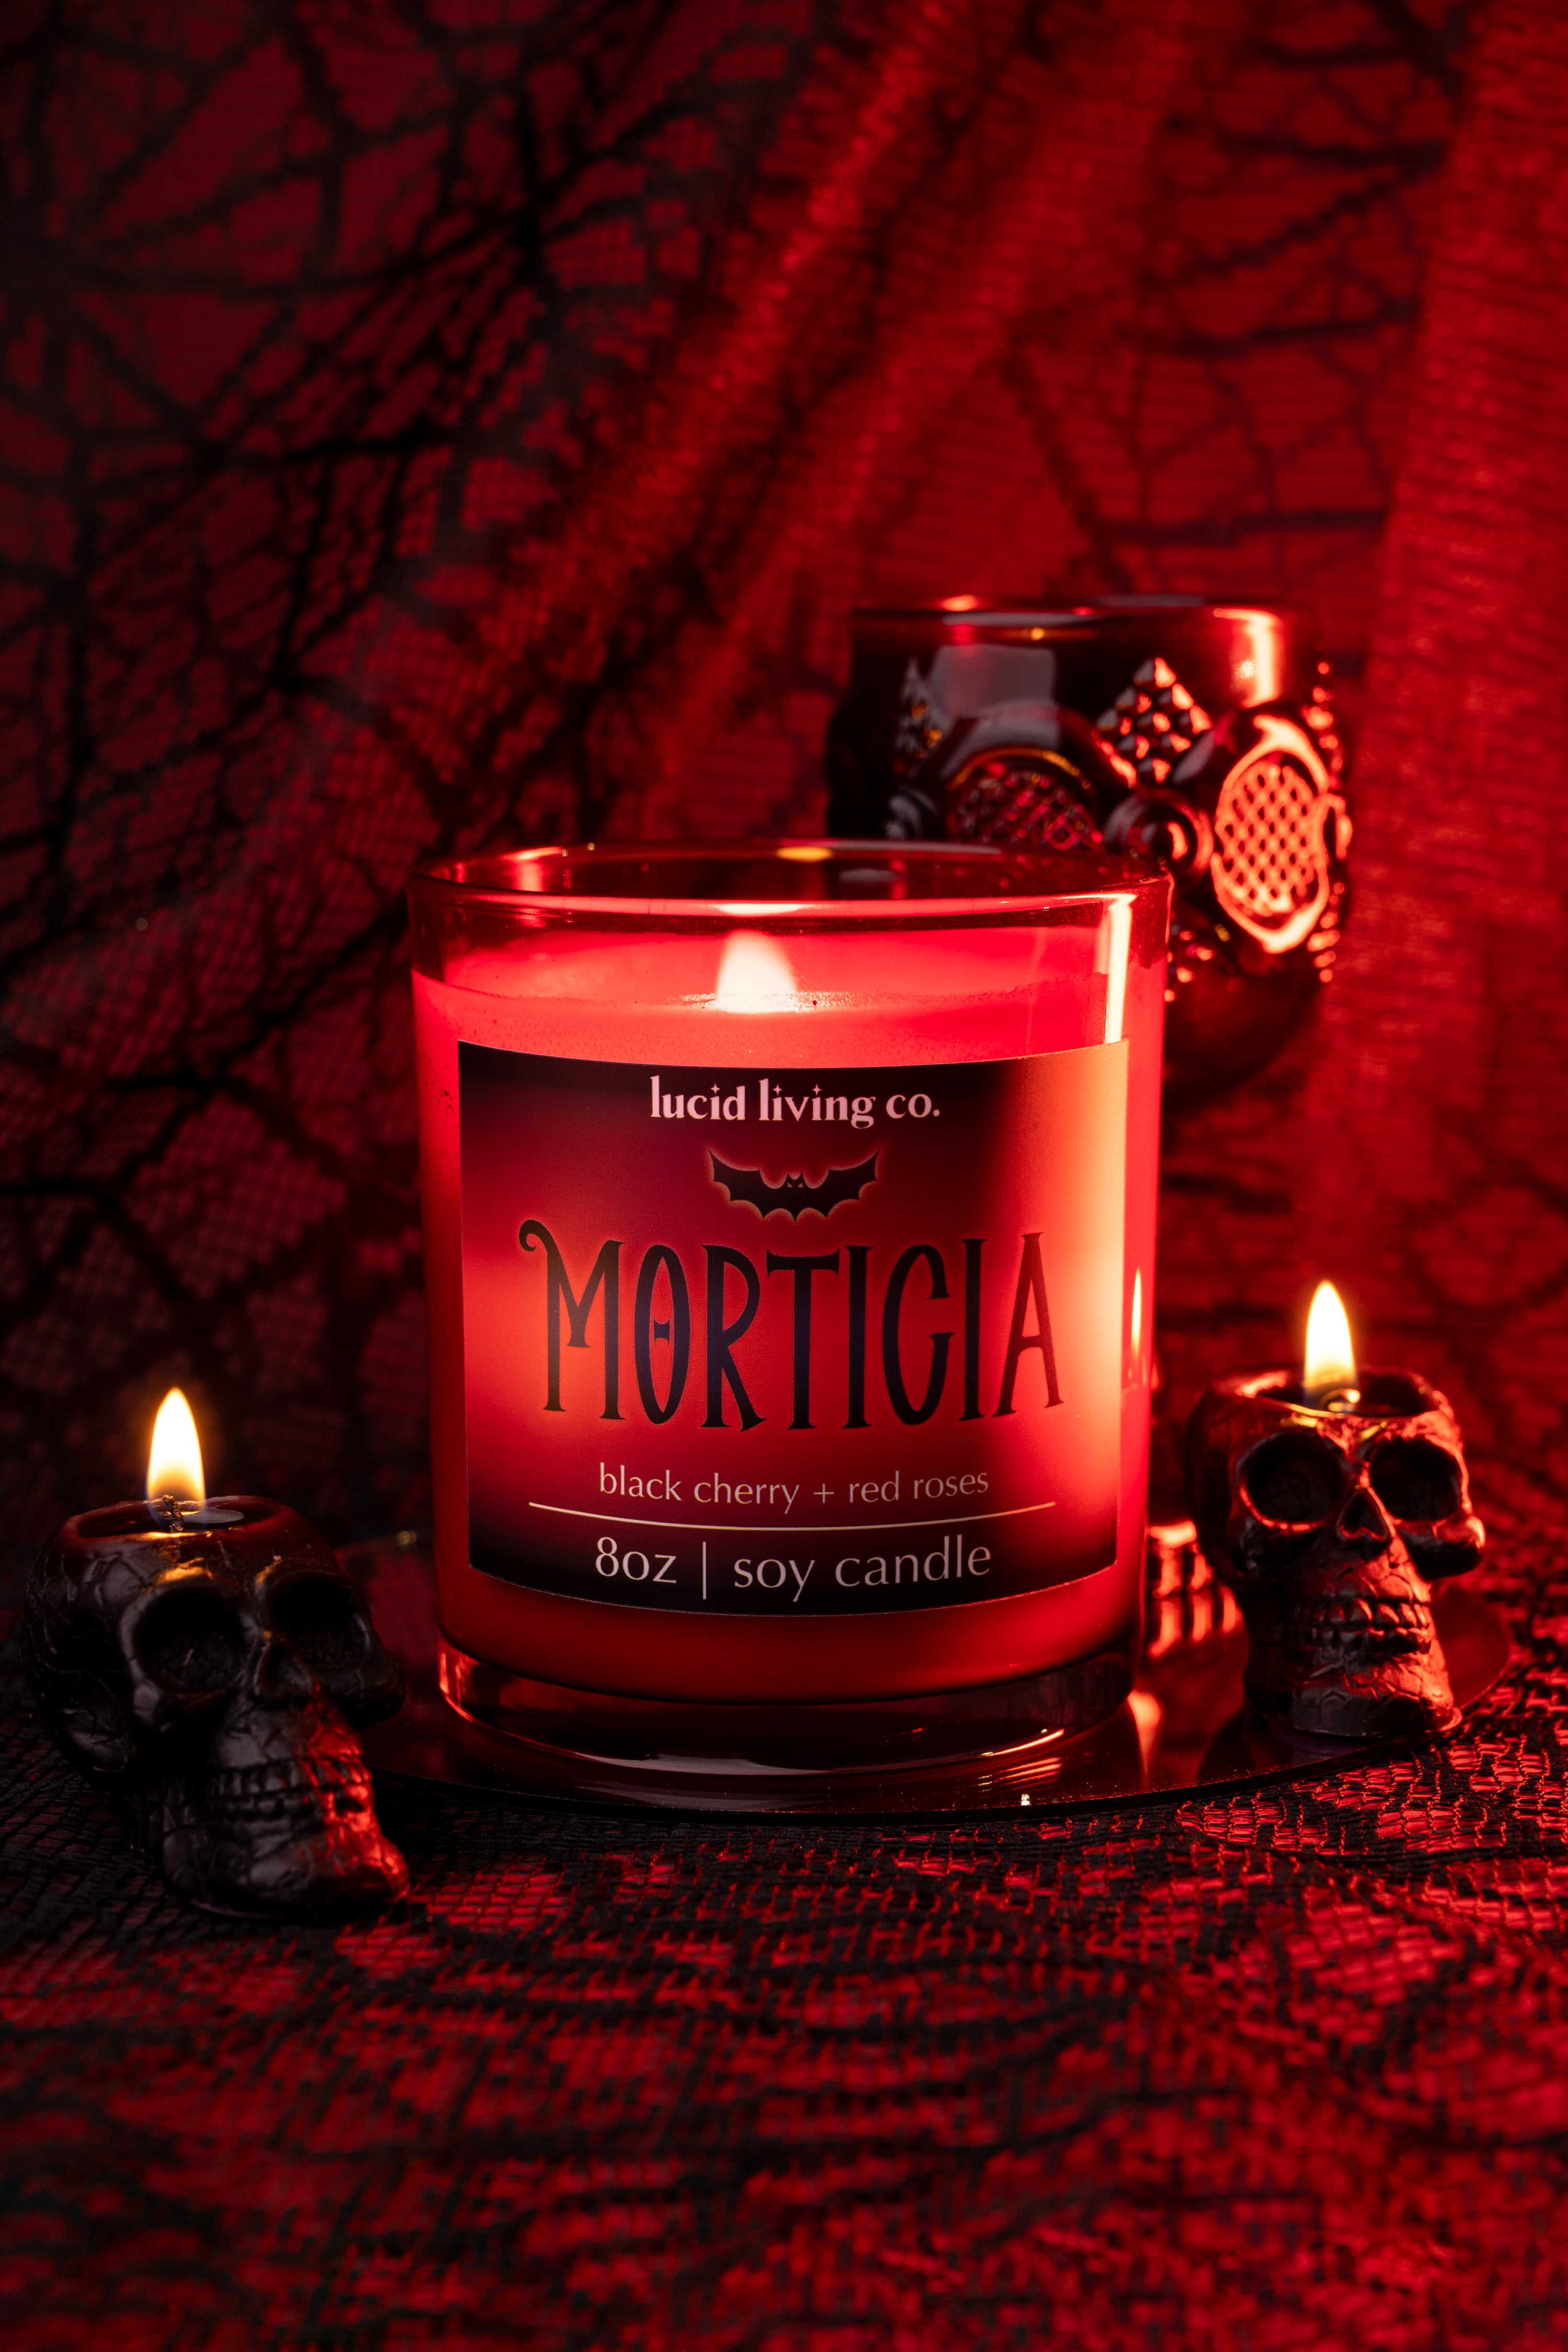 Morticia Soy Candle